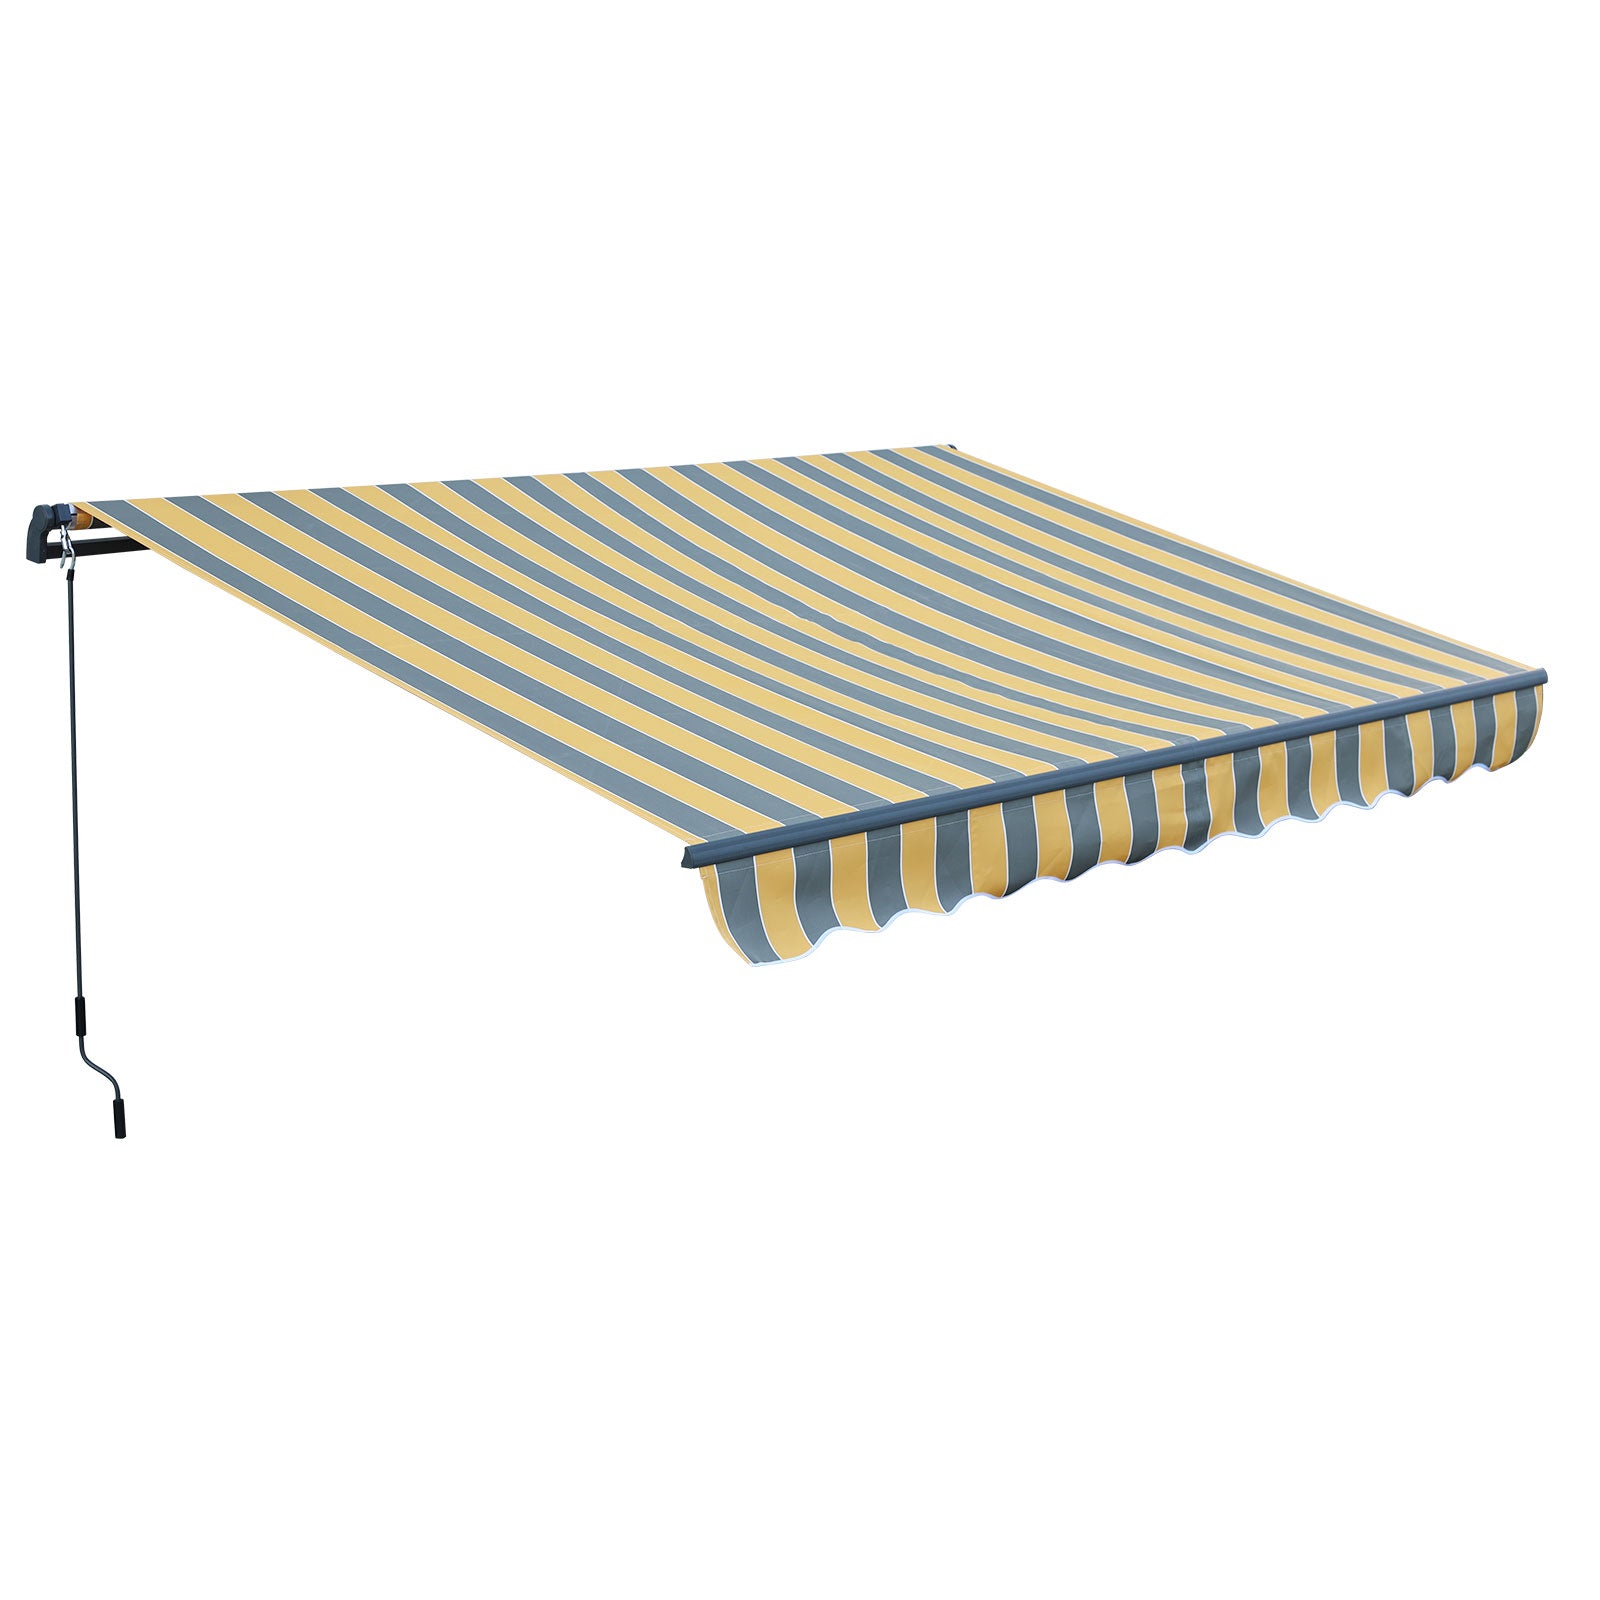 12'x  8' x 5' Retractable Window Awning Sunshade Shelter,Polyester Fabric,with Brackets and Two Wall Bases  Aoodor Gray and Yellow  